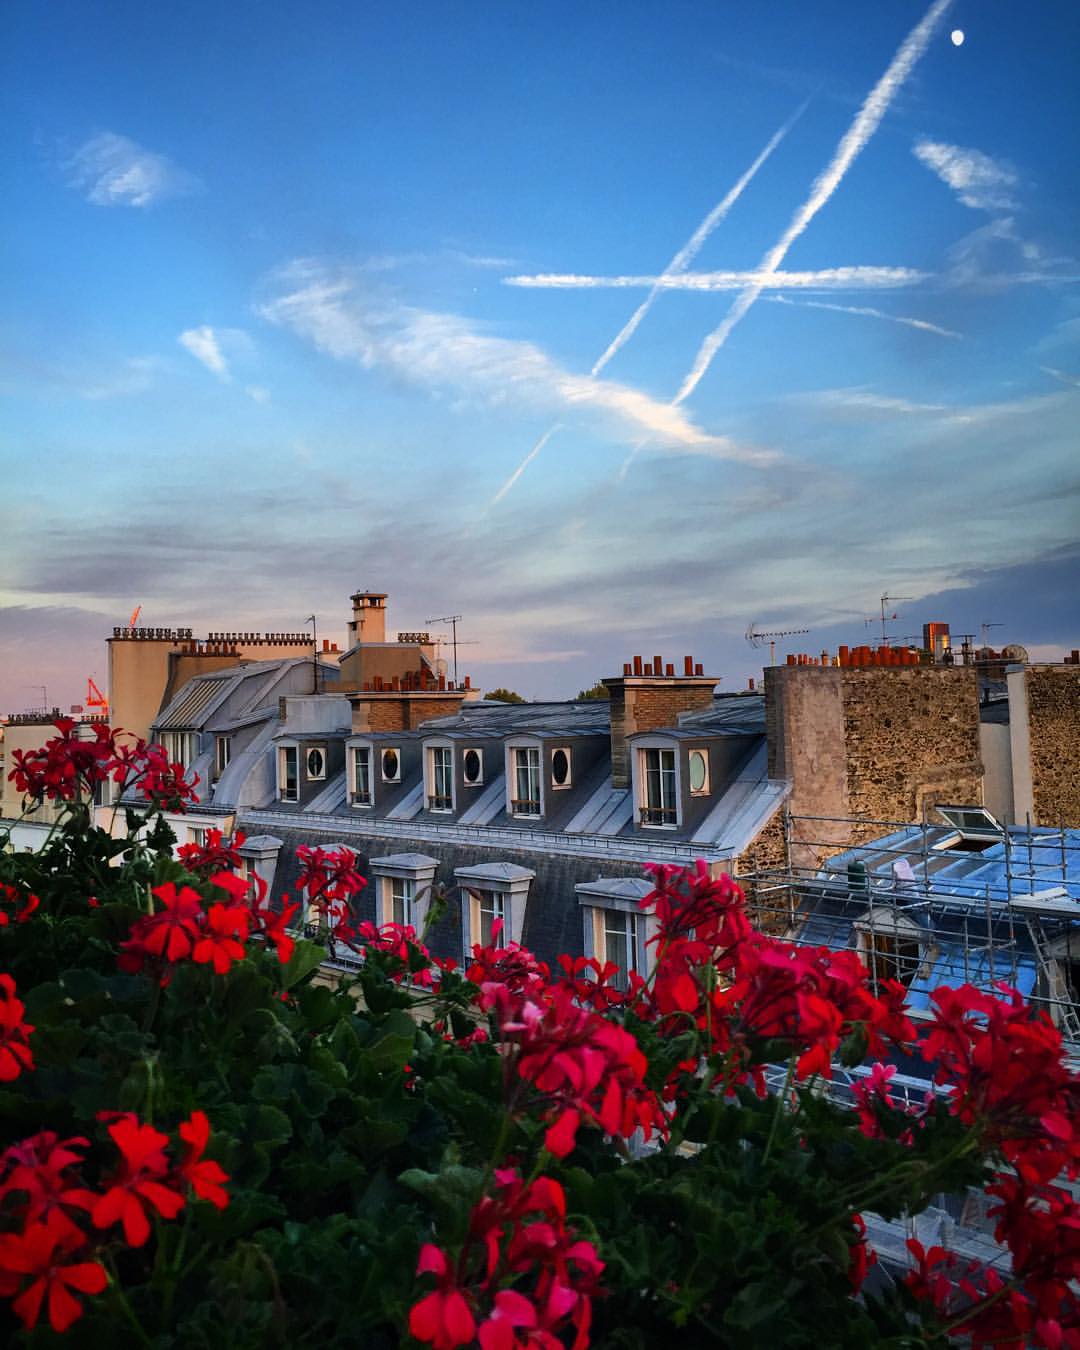 #Paris, you do a stunning evening sky. View from @lebrist...